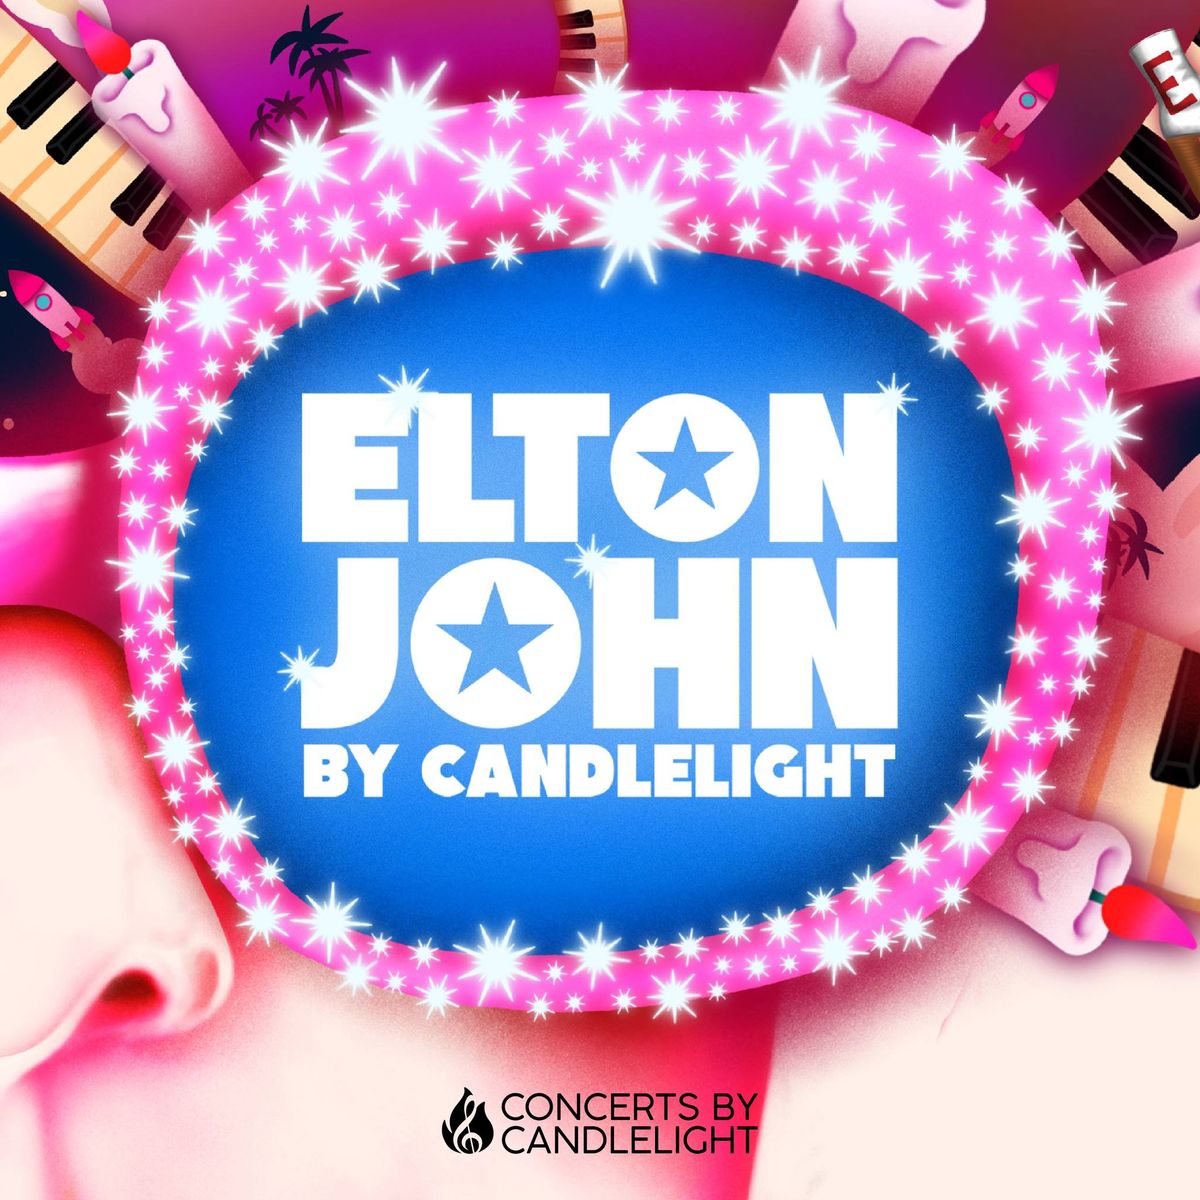 Elton John By Candlelight At Aylesbury Waterside Theatre